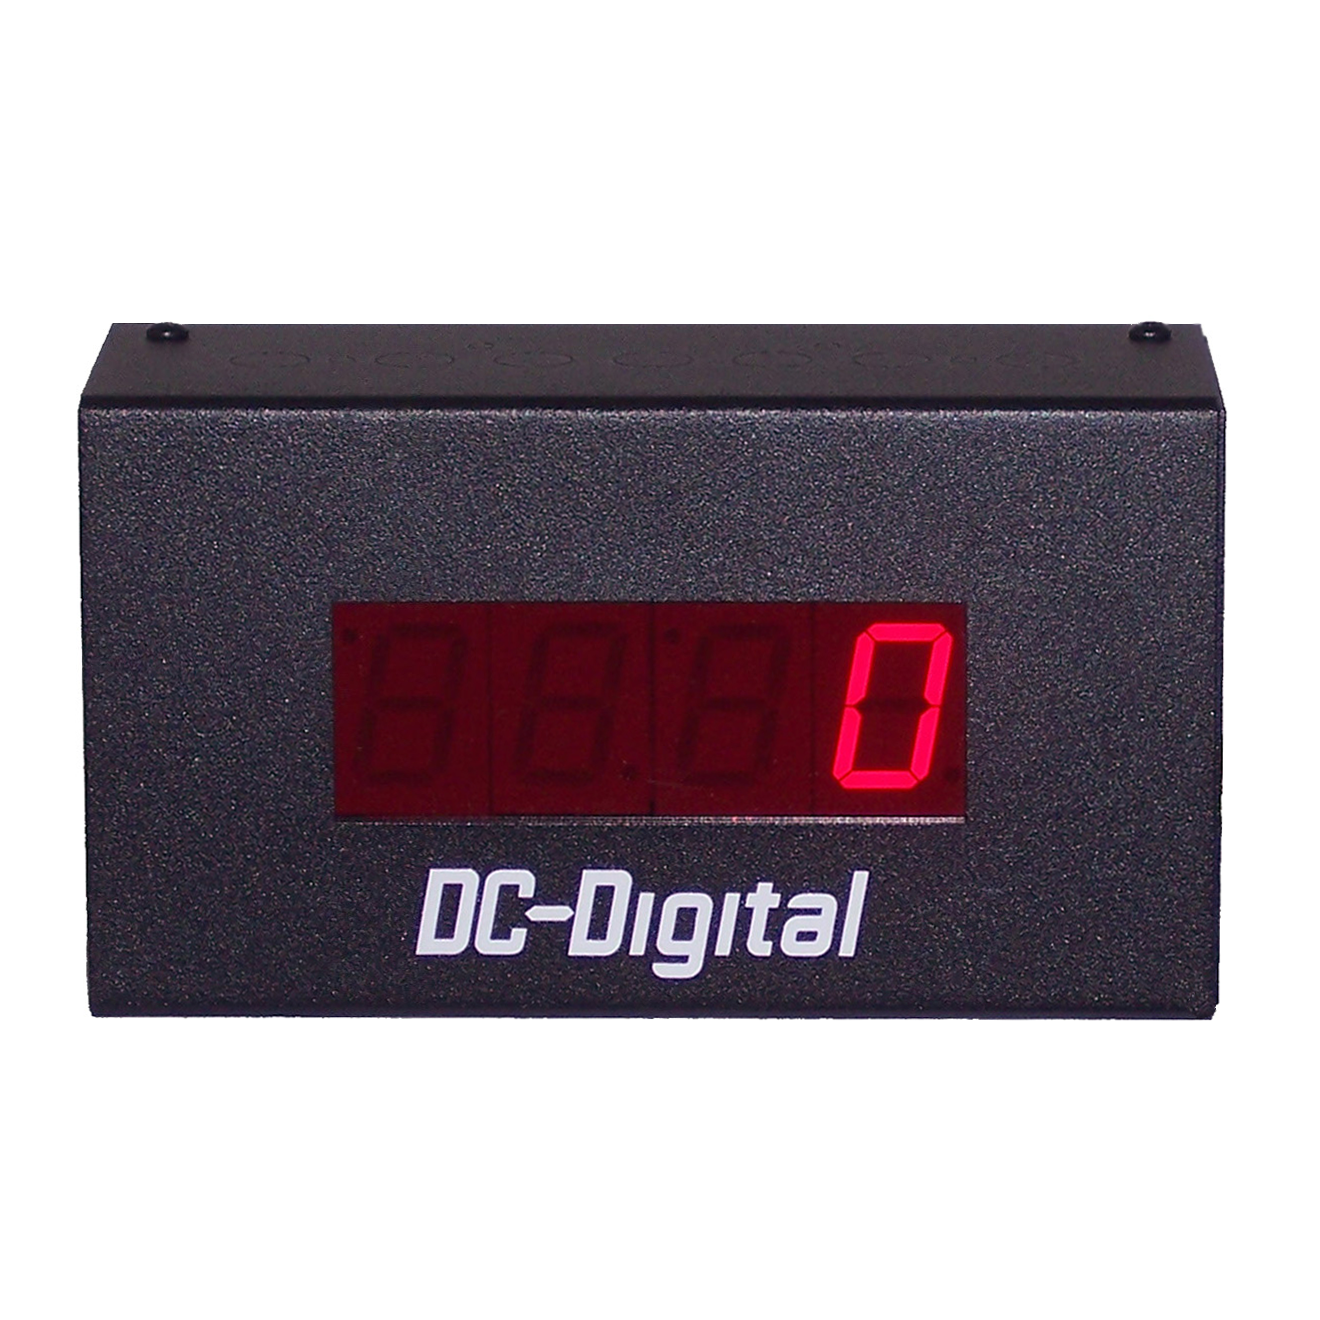 (DC-10C-Term) 1.0 Inch LED Digital, Multi-Input, Counter that accepts: PLC, Relay, Switch and Sensor Input Controls